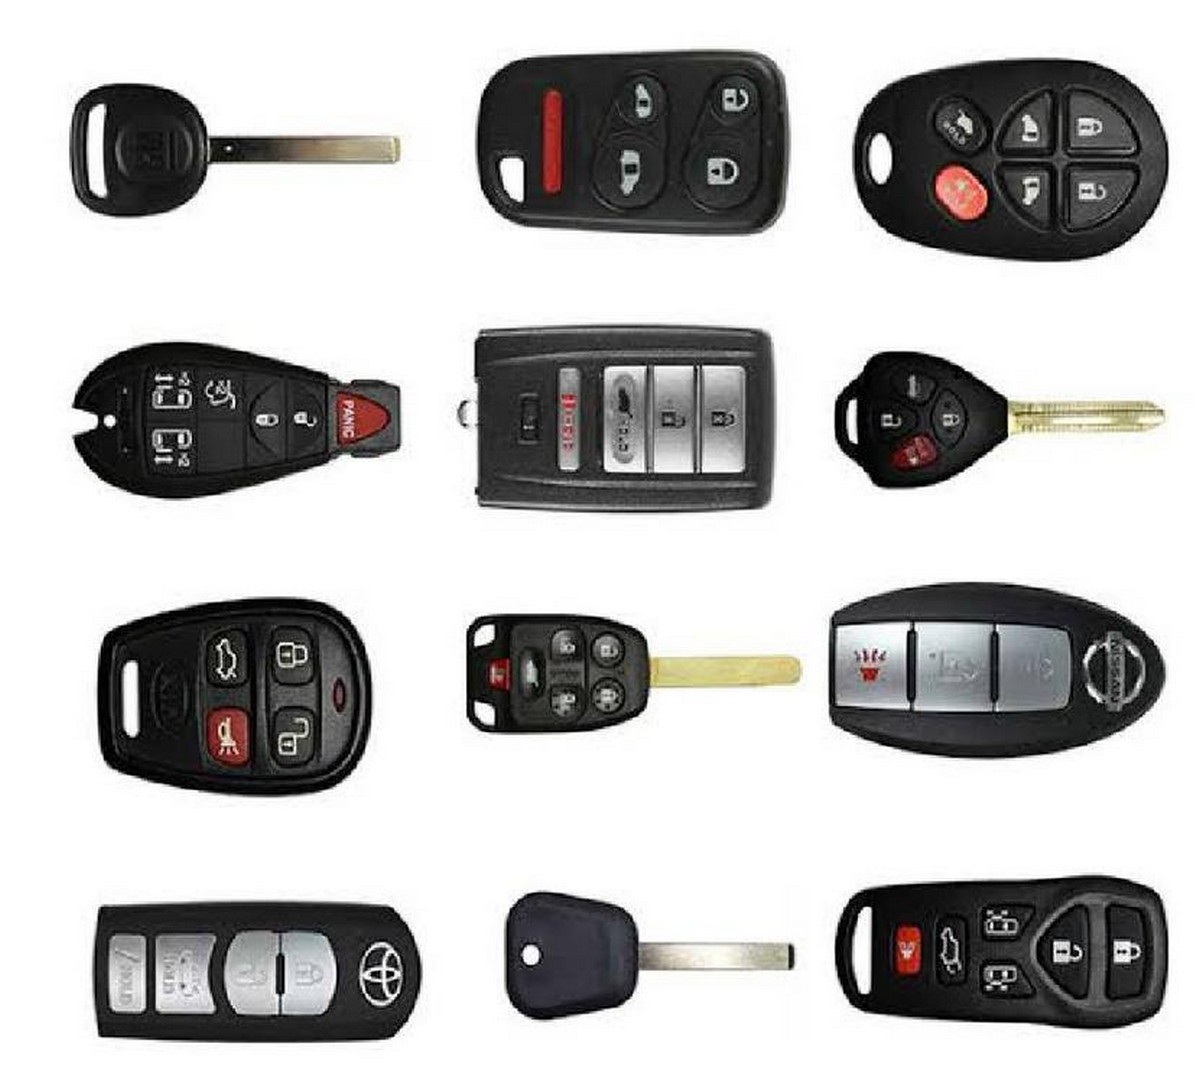 key-and-remote-key-available-40440843 - News 